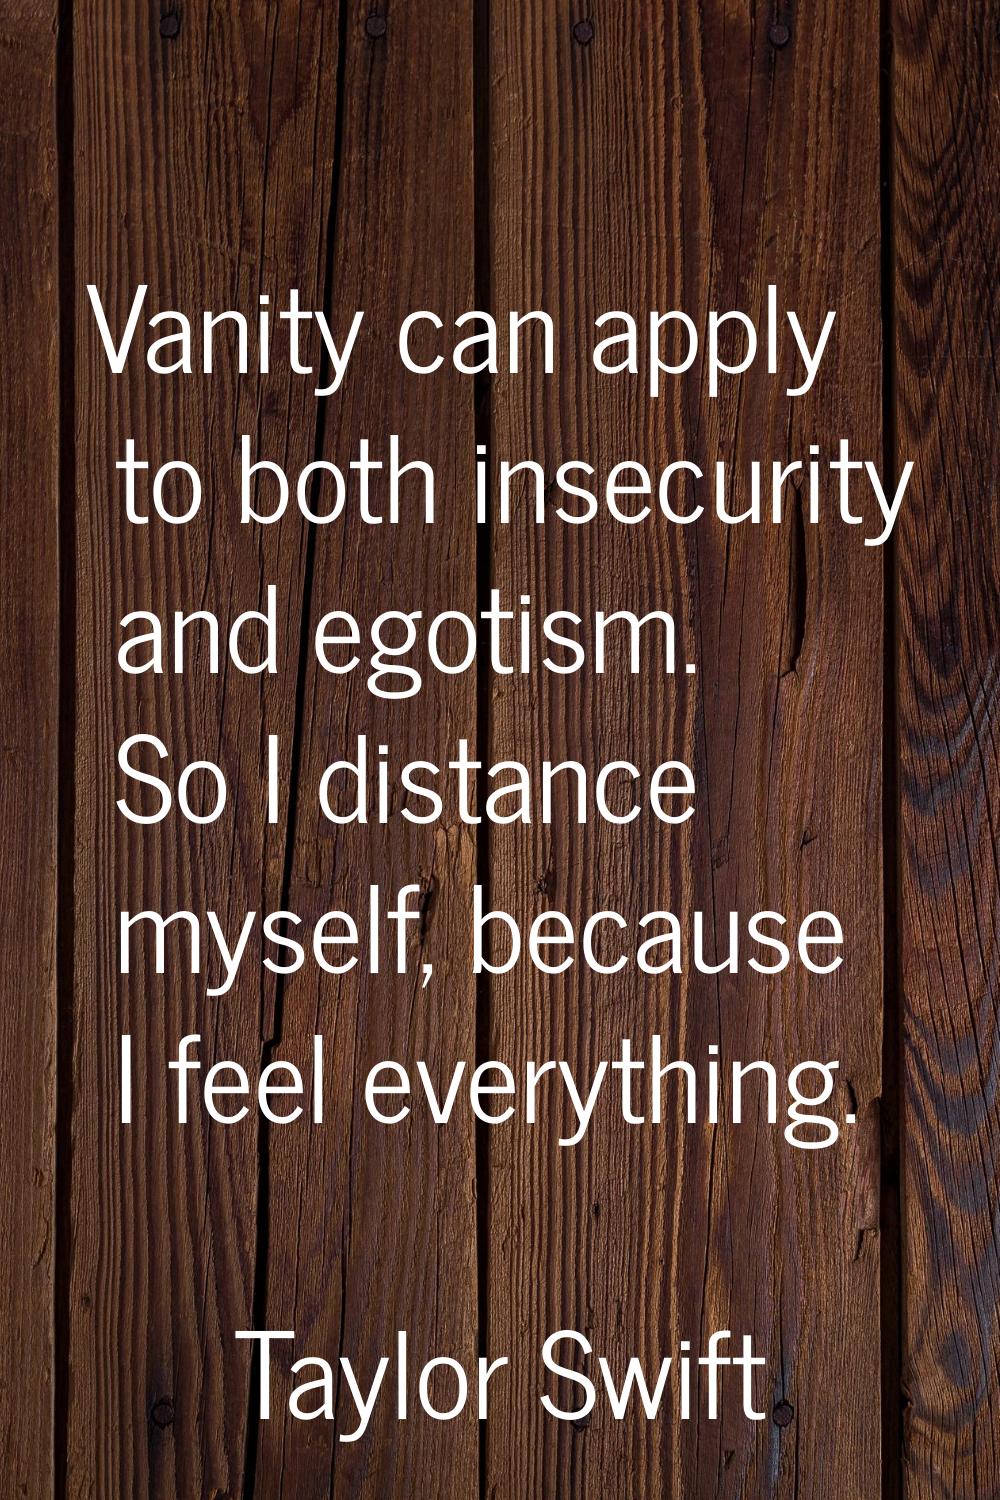 Vanity can apply to both insecurity and egotism. So I distance myself, because I feel everything.